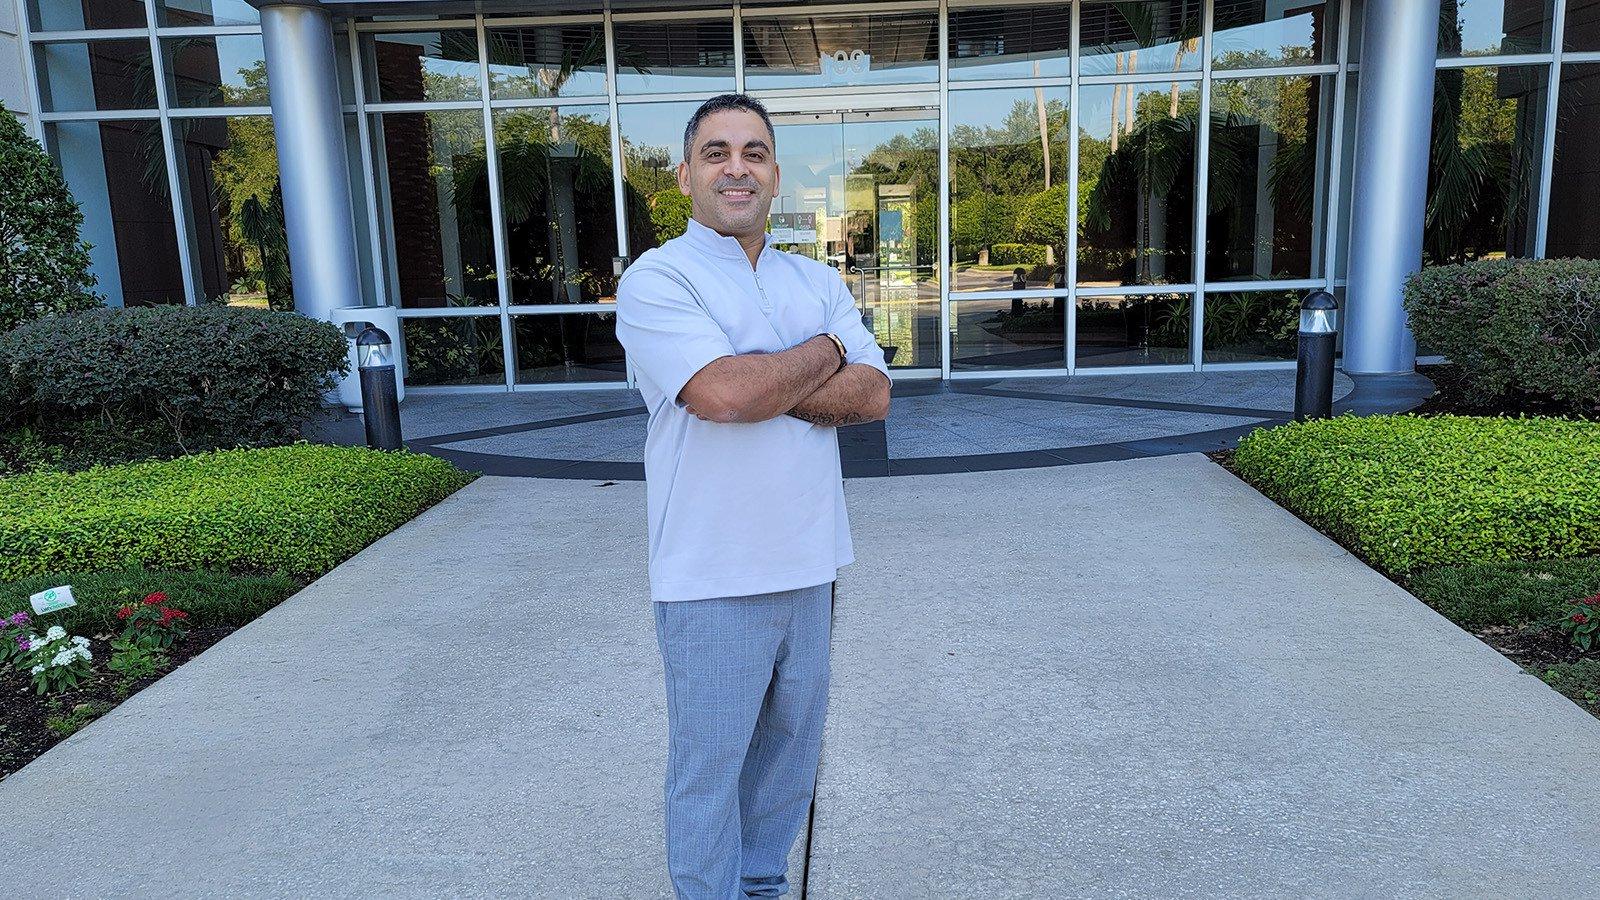 Brian Alvarado stands smiling with his arms crossed in front of the Deloitte building. He wears gray slacks and a blue shirt.